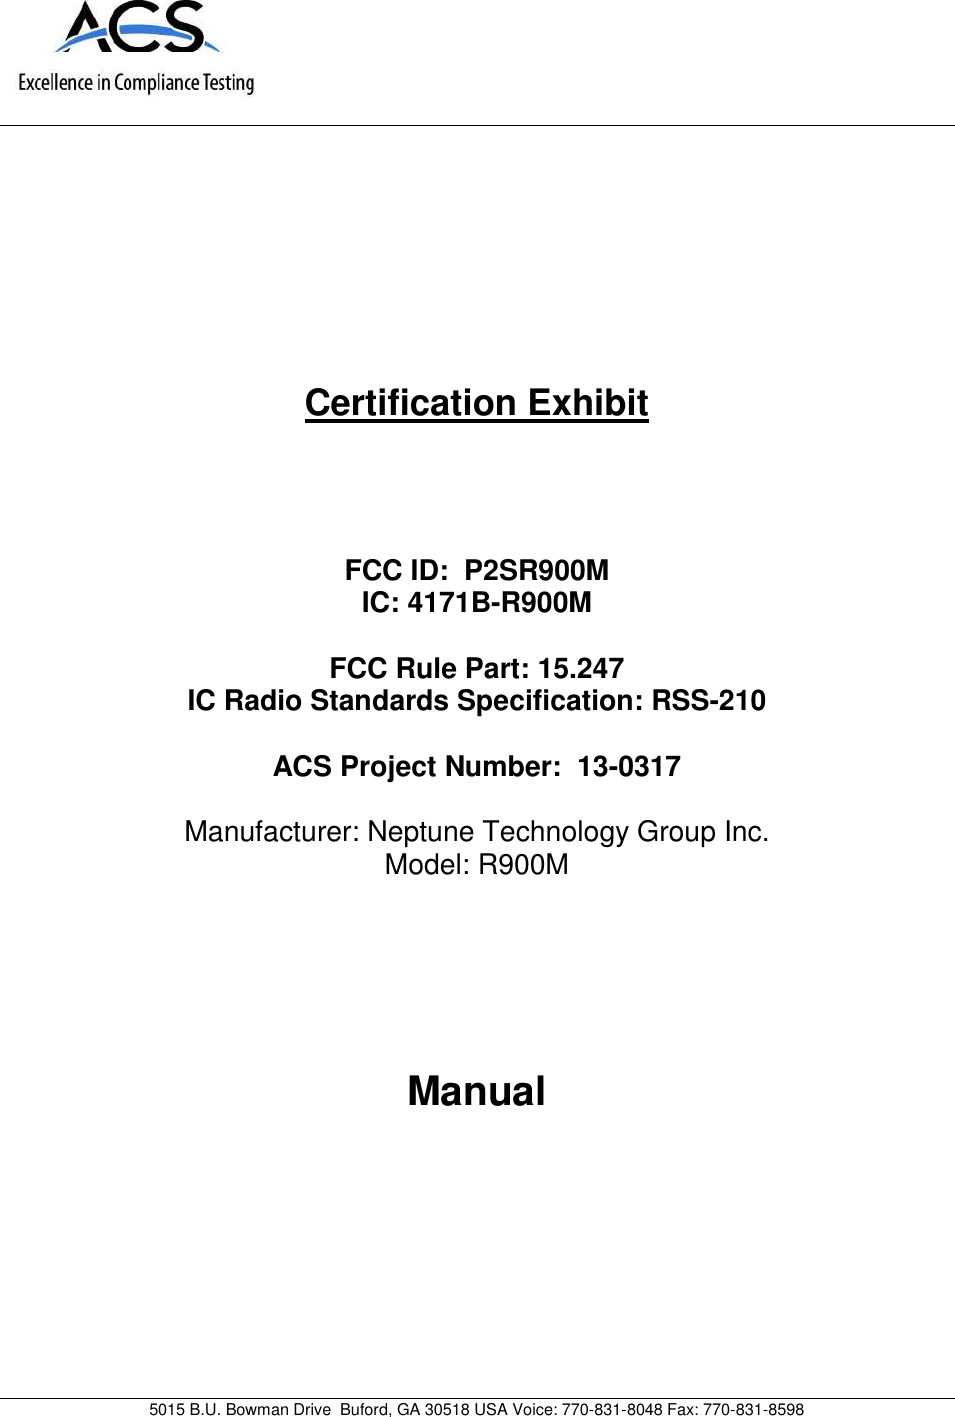 5015 B.U. Bowman Drive Buford, GA 30518 USA Voice: 770-831-8048 Fax: 770-831-8598Certification ExhibitFCC ID: P2SR900MIC: 4171B-R900MFCC Rule Part: 15.247IC Radio Standards Specification: RSS-210ACS Project Number: 13-0317Manufacturer: Neptune Technology Group Inc.Model: R900MManual